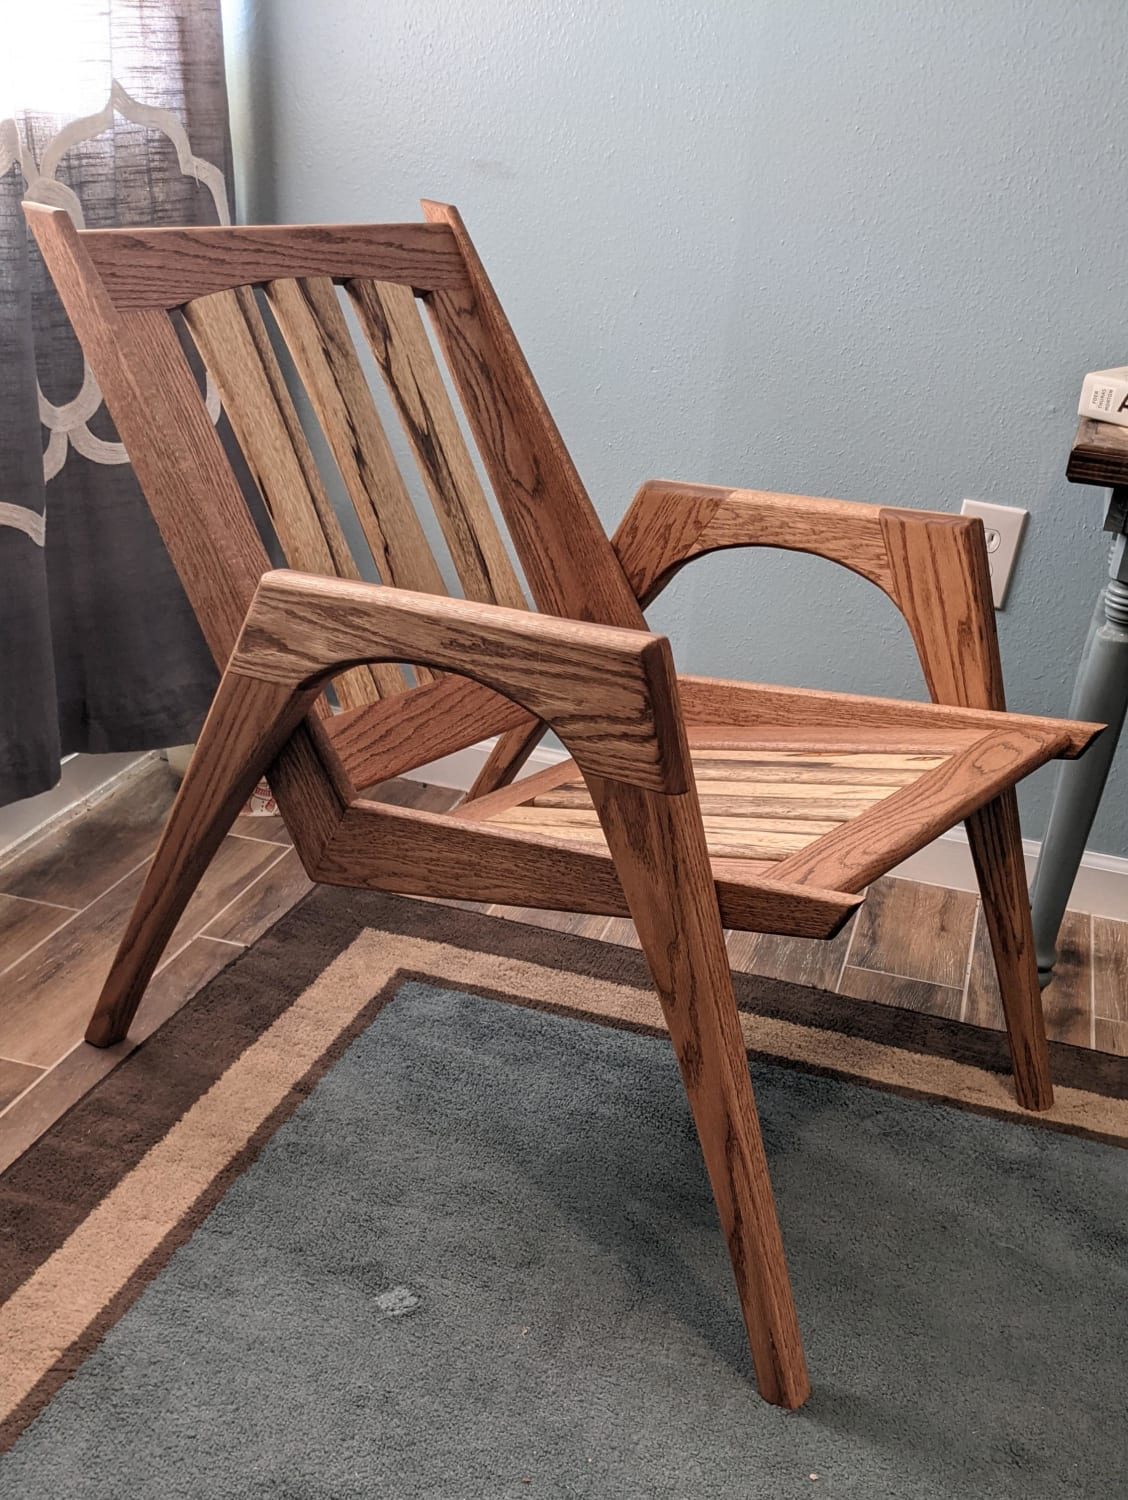 First chair (really first furniture in general)